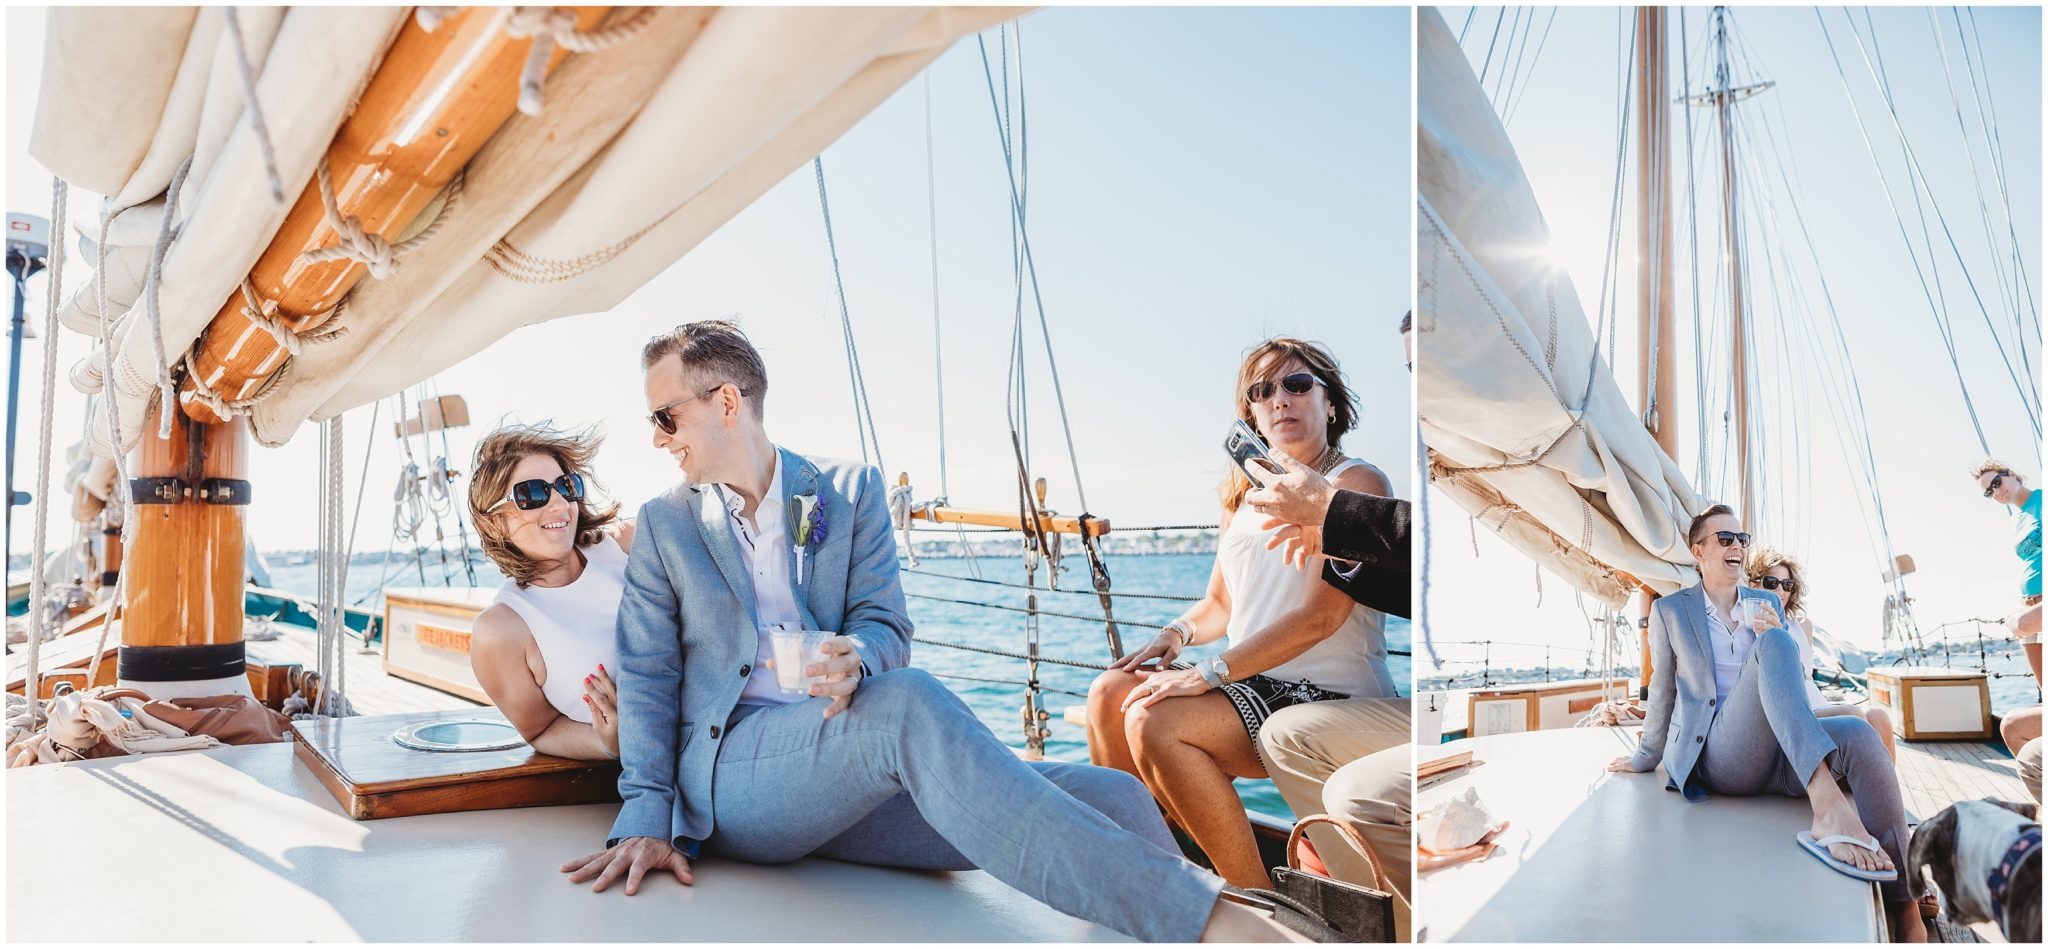 groom and bridesmaid relaxing on ship - cape wedding photographer